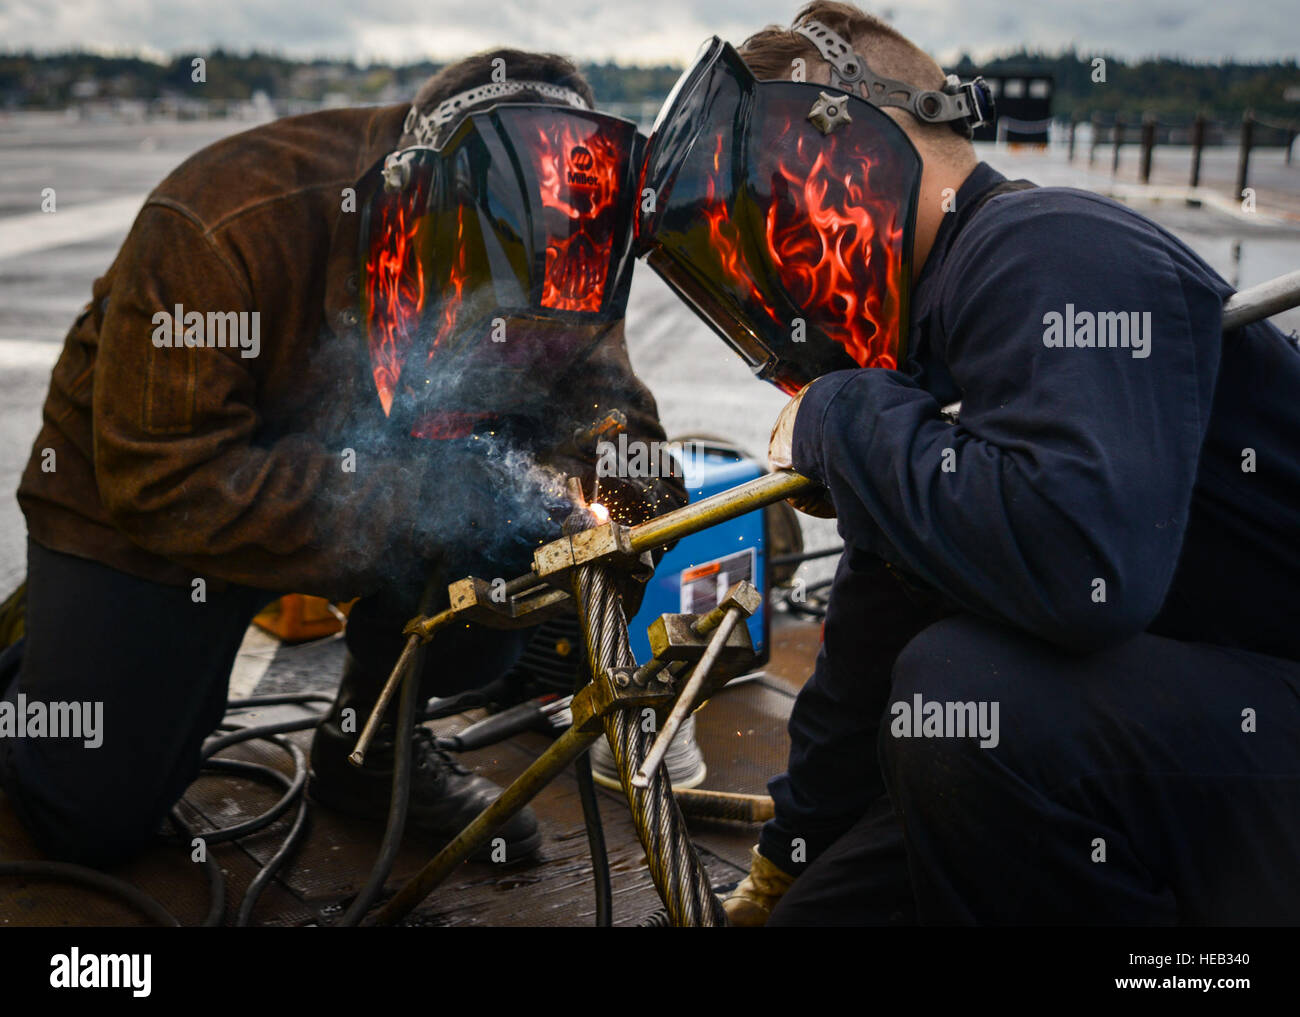 NAVAL BASE KITSAP-BREMERTON, Wash. (Oct. 2, 2016) - Seaman Chase Ethridge (right), a native of Katy, Texas, steadies an arresting cable while Petty Officer 3rd Class Gabriel Moreno, a native of Huntington Beach, Calif., welds during a reweave of the arresting gear on board USS Nimitz (CVN 68). Nimitz is currently undergoing an extended planned incremental maintenance availability at Puget Sound Naval Shipyard and Intermediate Maintenance Facility where the ship is receiving scheduled maintenance and upgrades.  Petty Officer 3rd Class Samuel Bacon Stock Photo